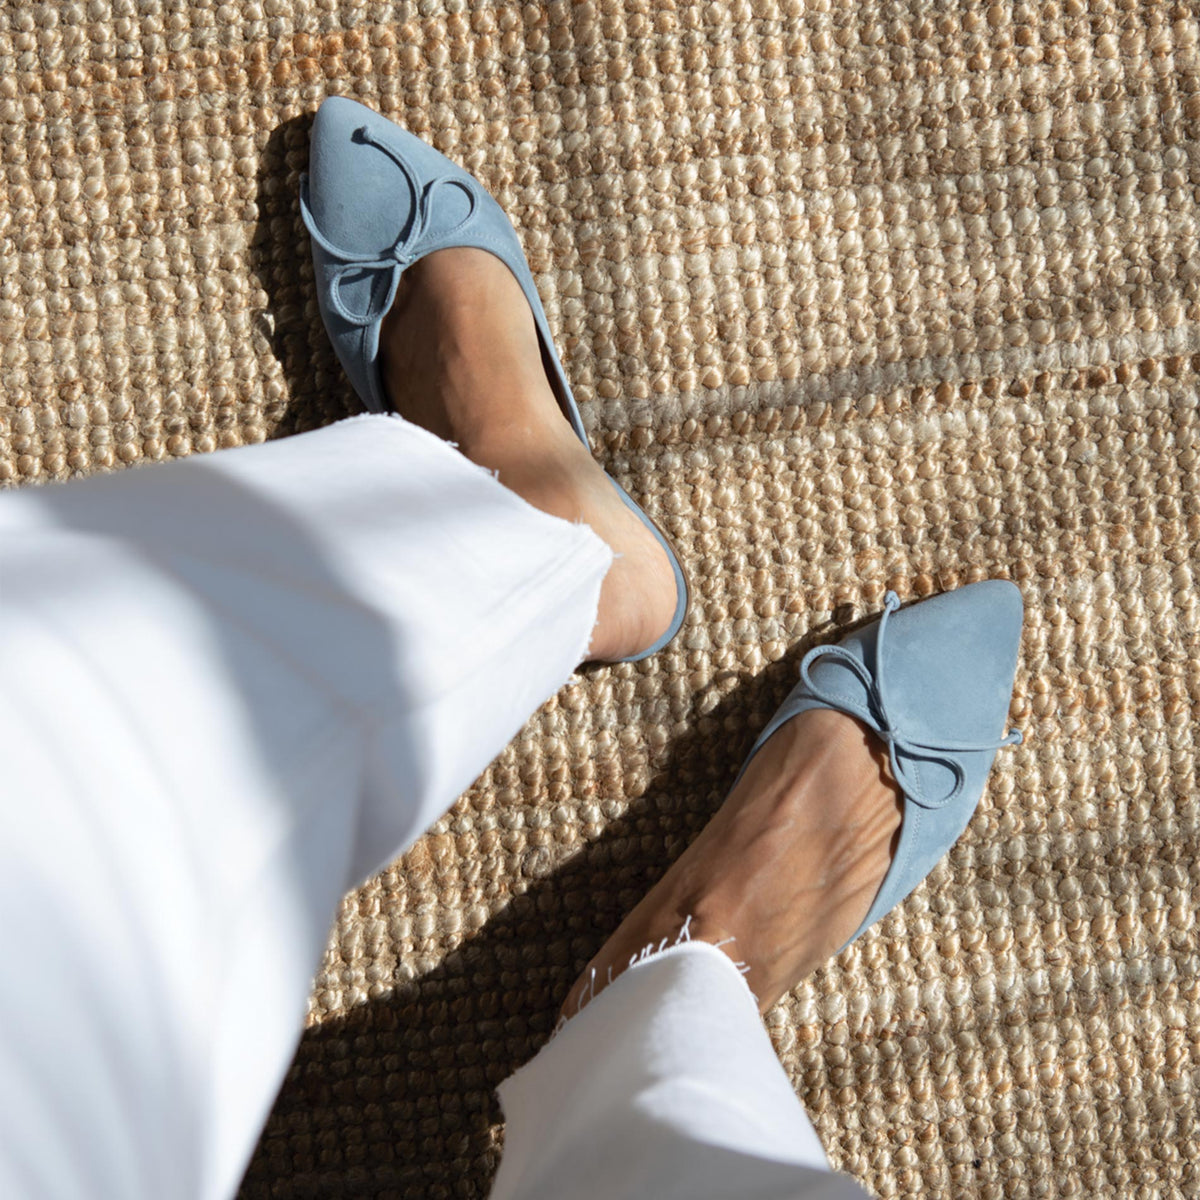 The Ballet Mule in French Blue Suede